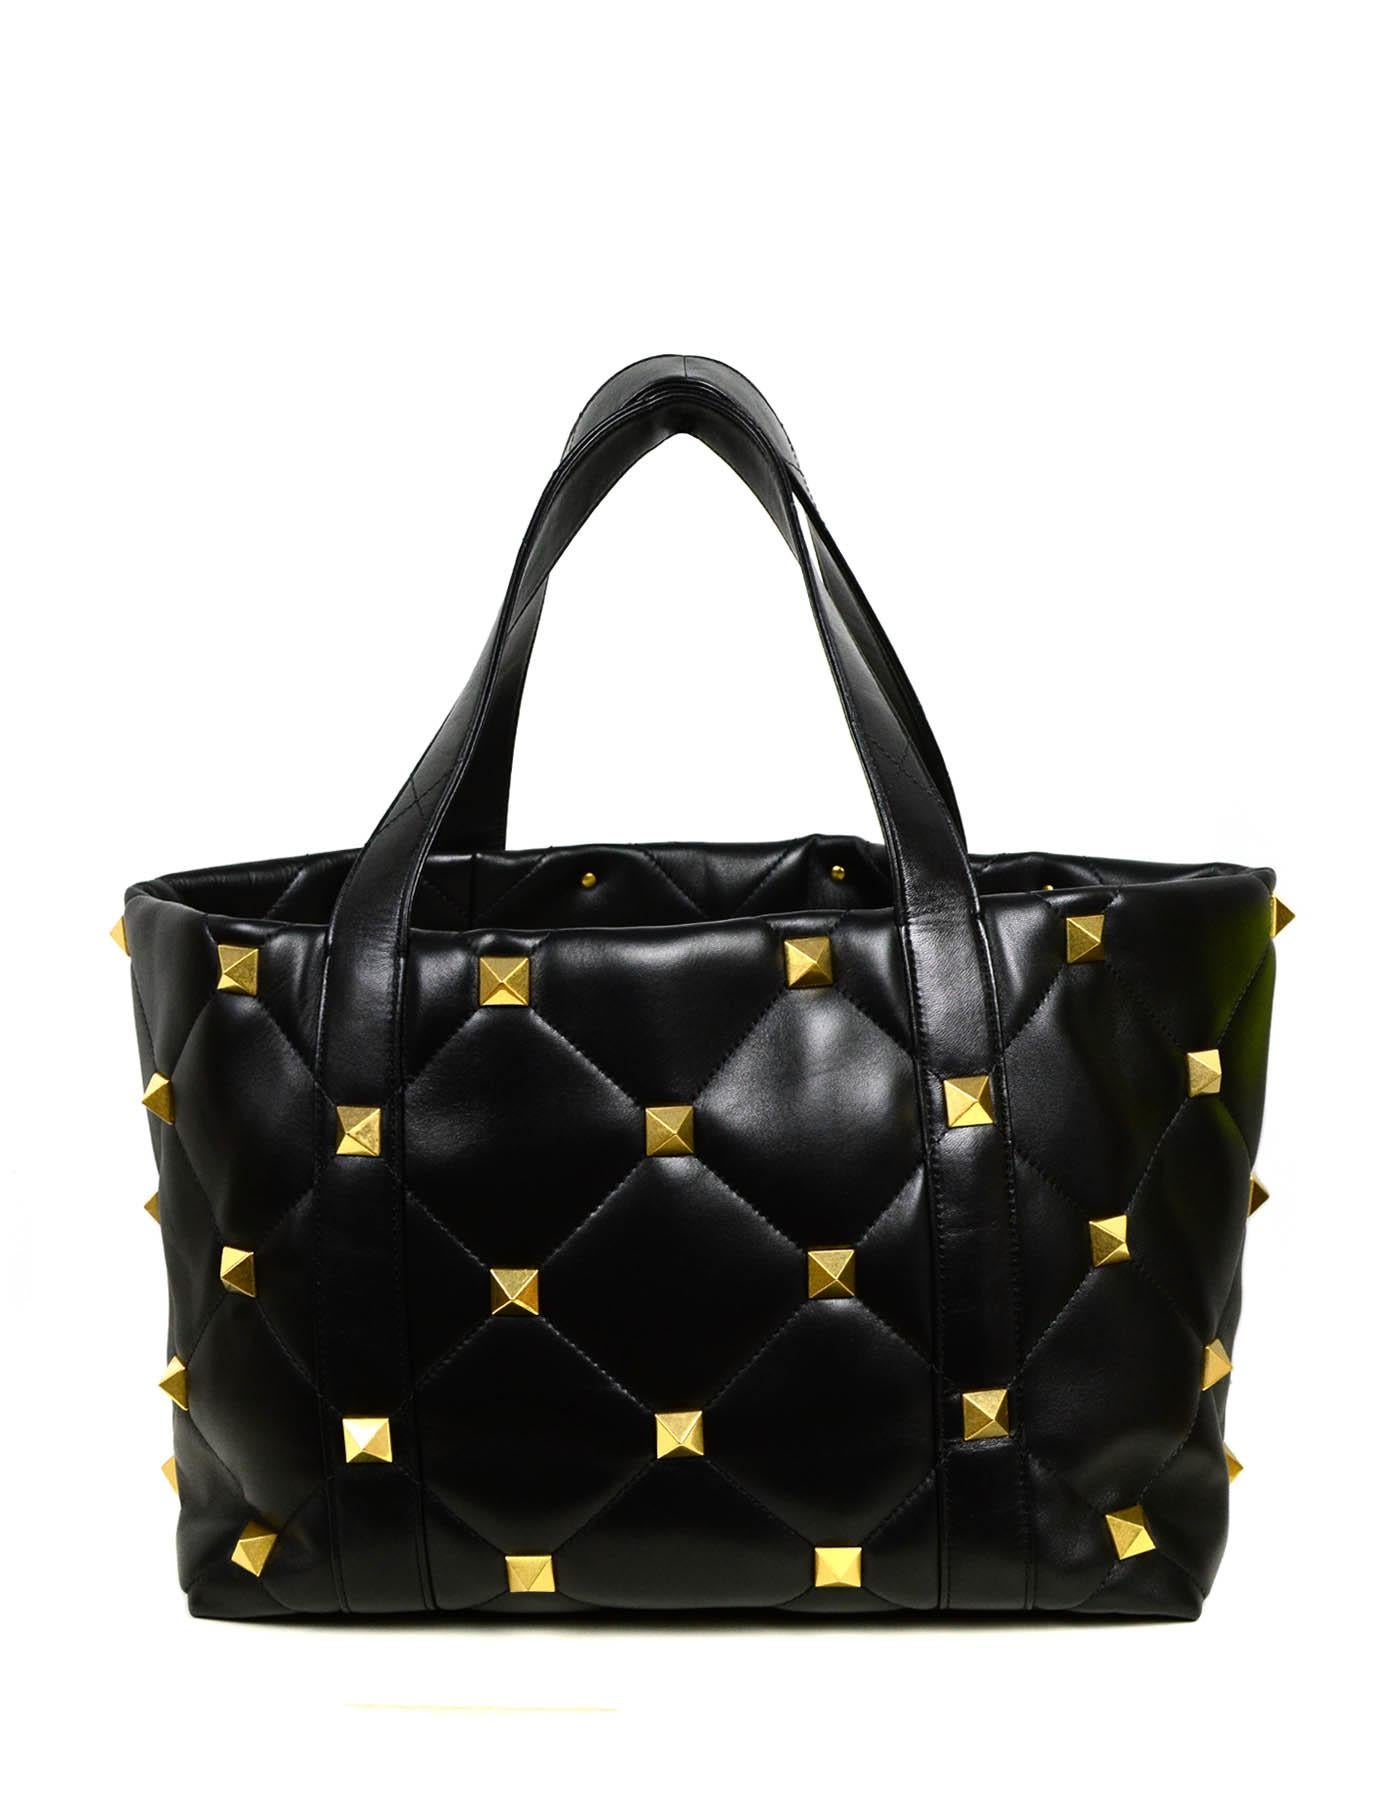 black leather tote bag with studs